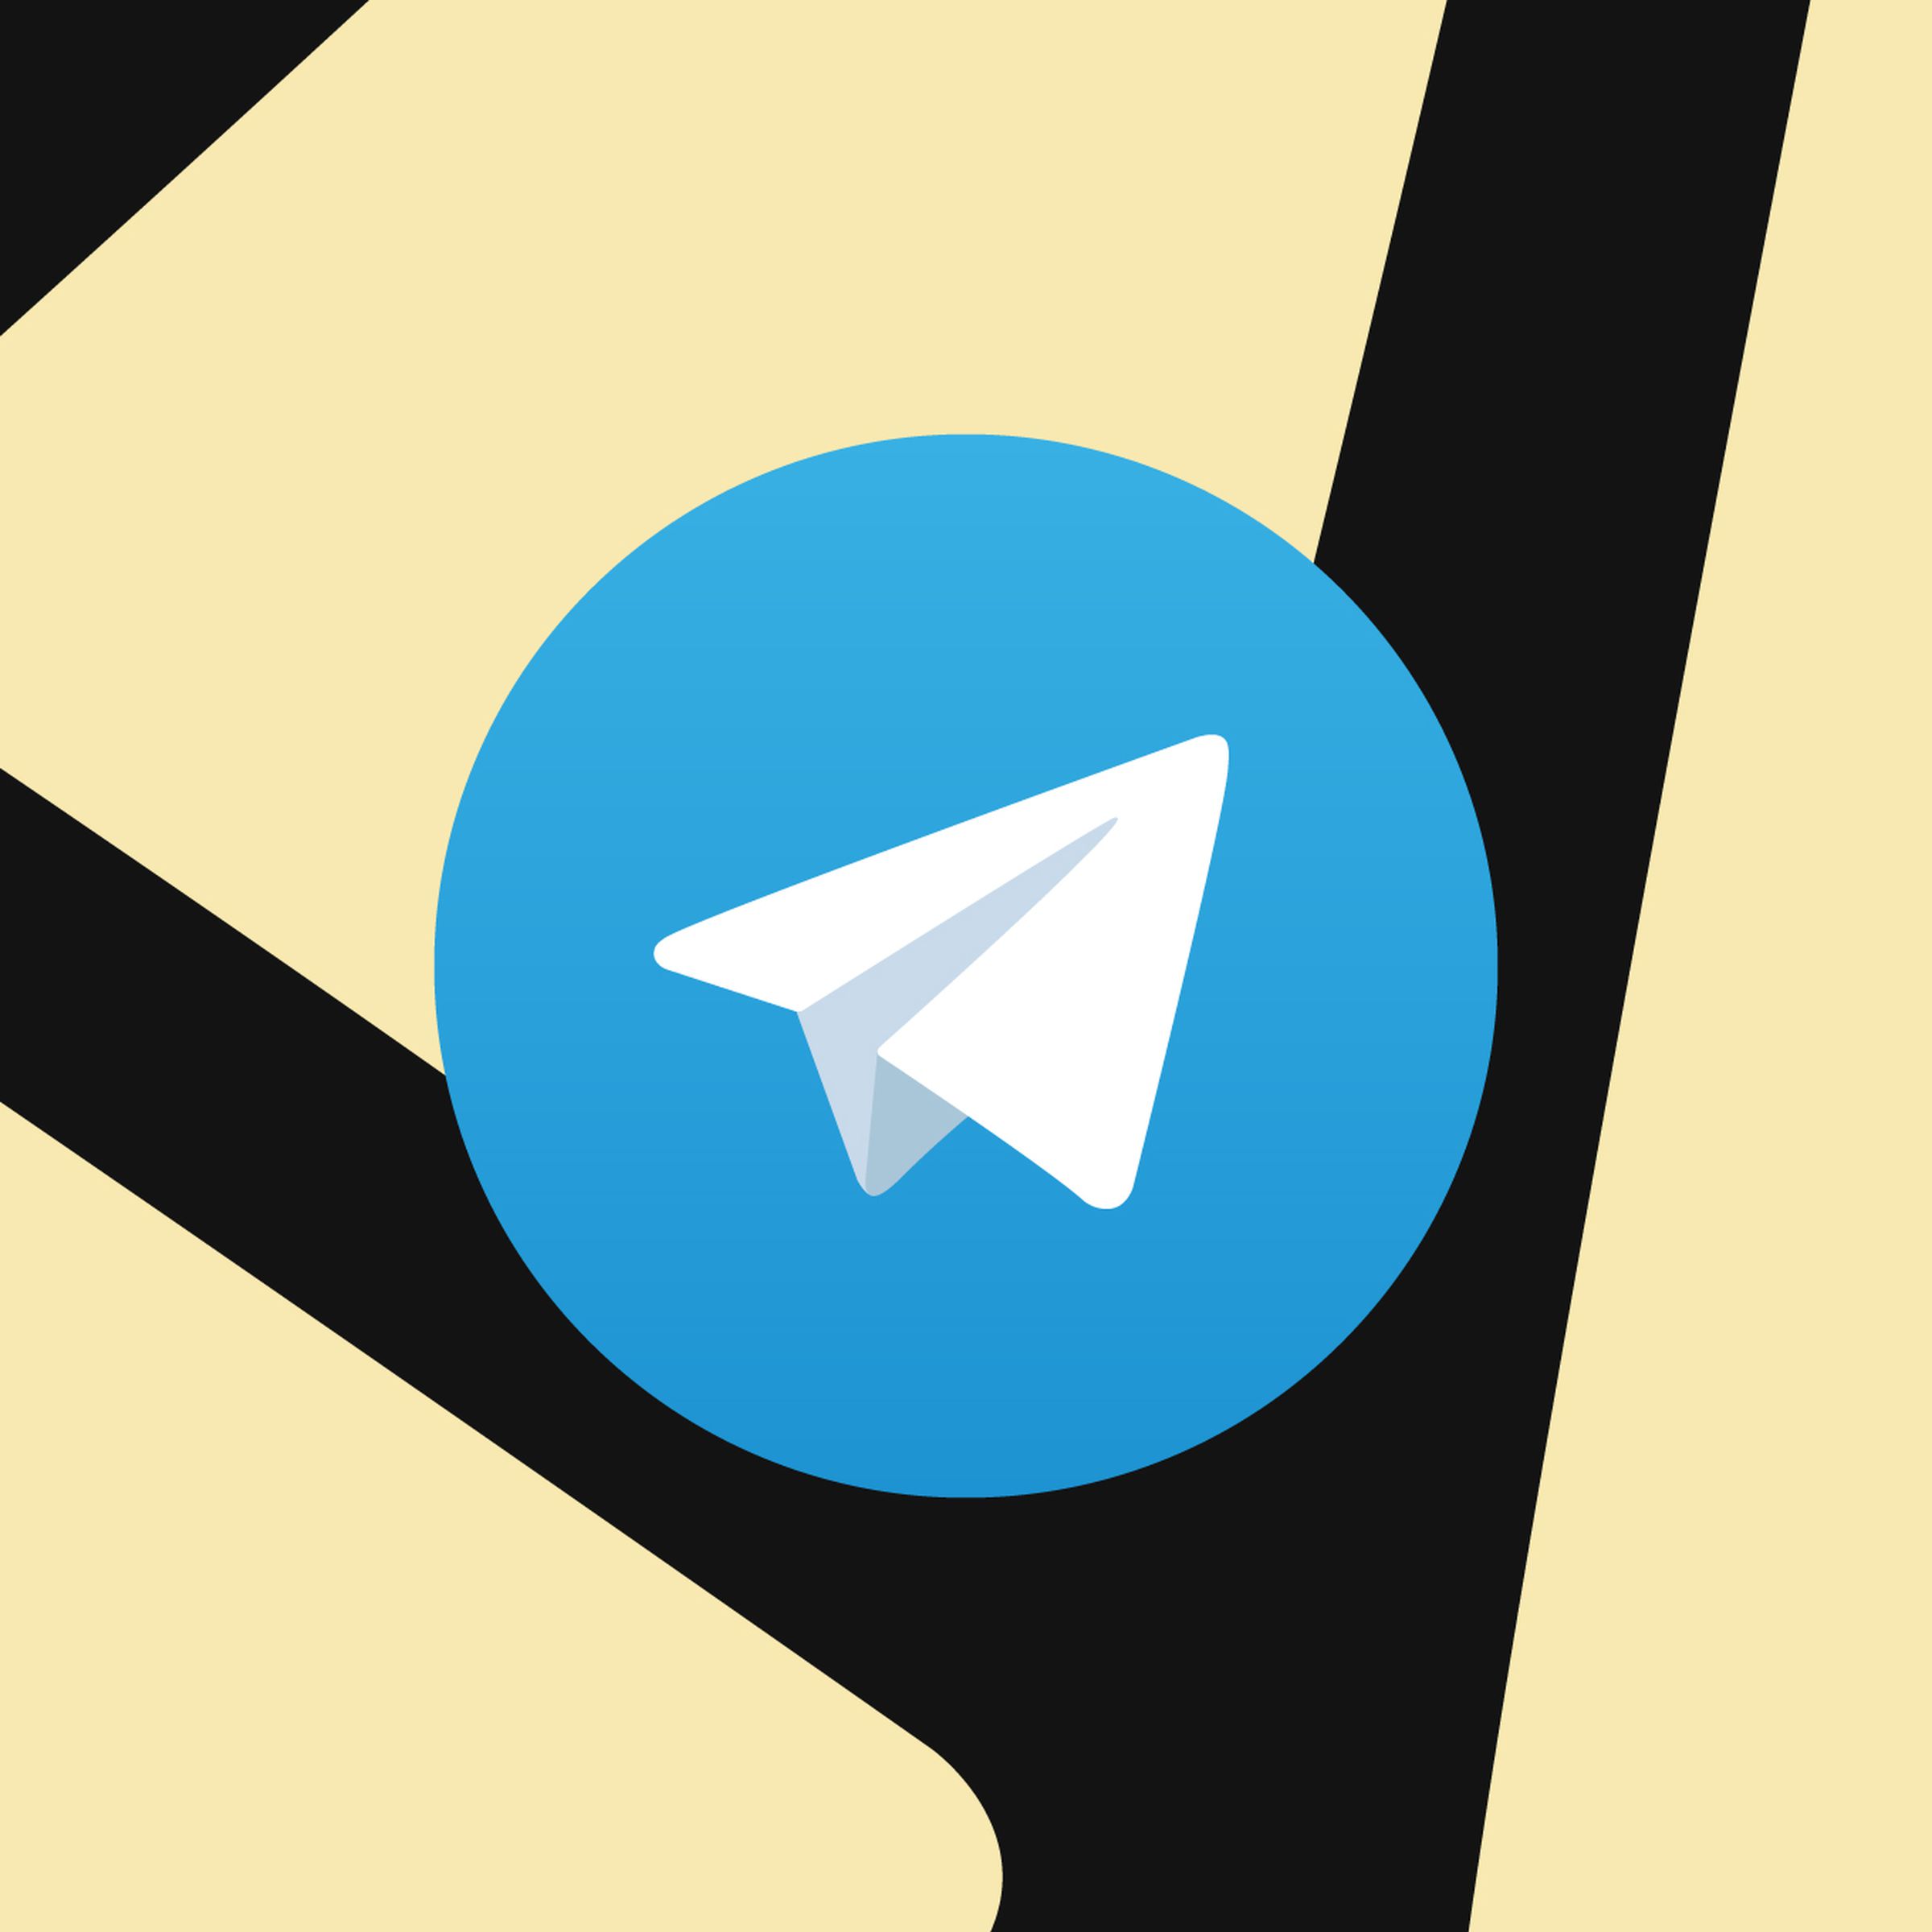 A picture of Telegram’s paper airplane logo surrounded by yellow triangular shapes